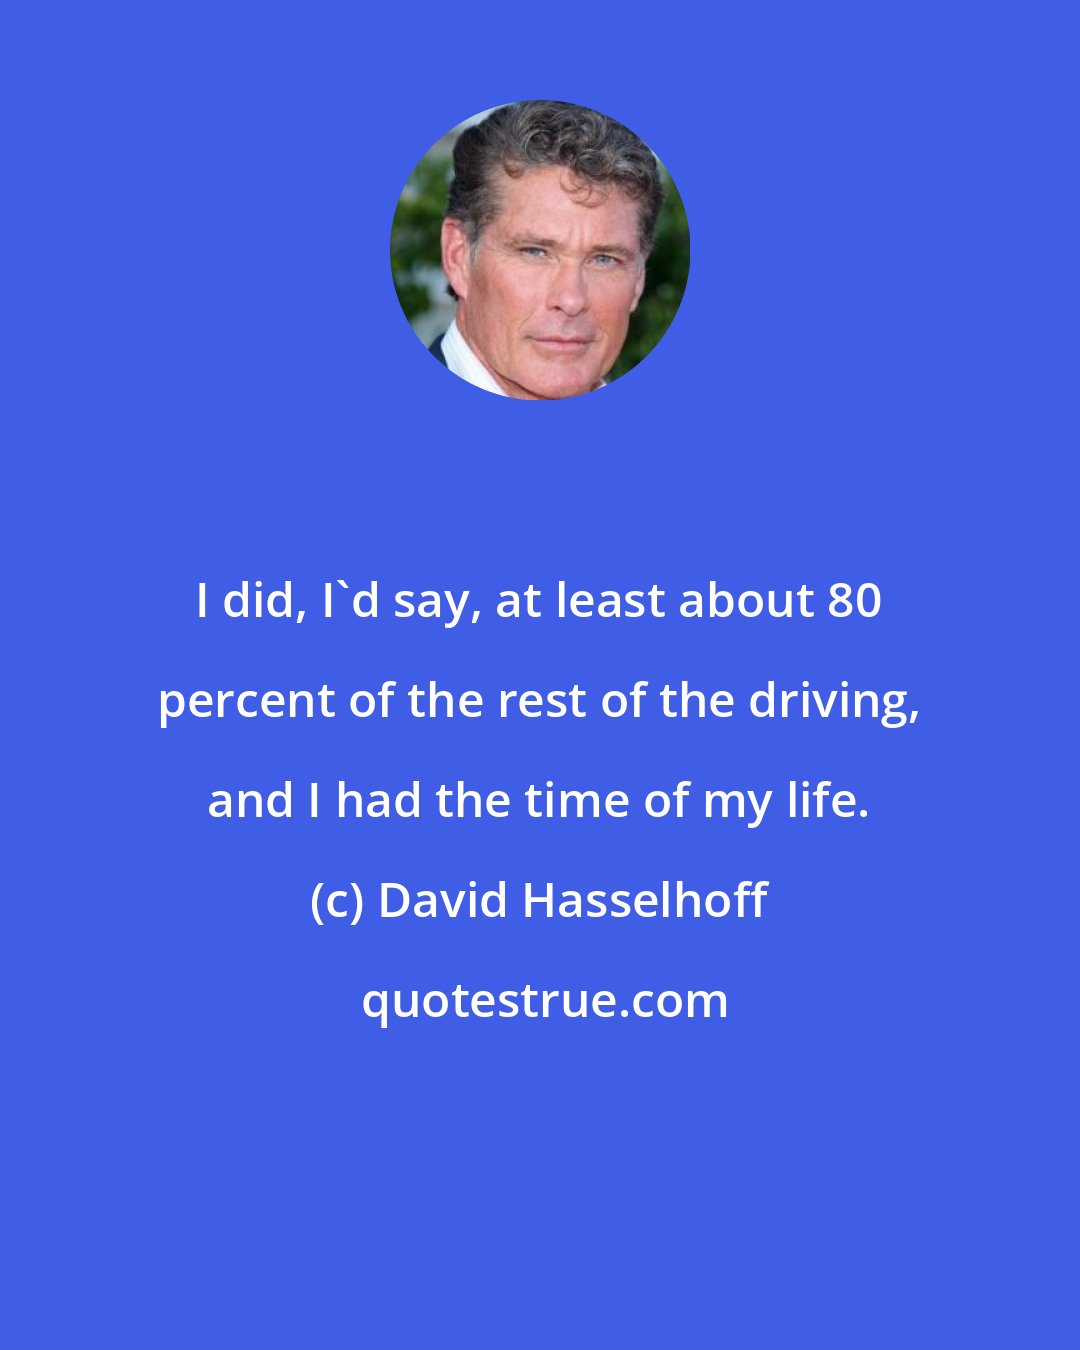 David Hasselhoff: I did, I'd say, at least about 80 percent of the rest of the driving, and I had the time of my life.